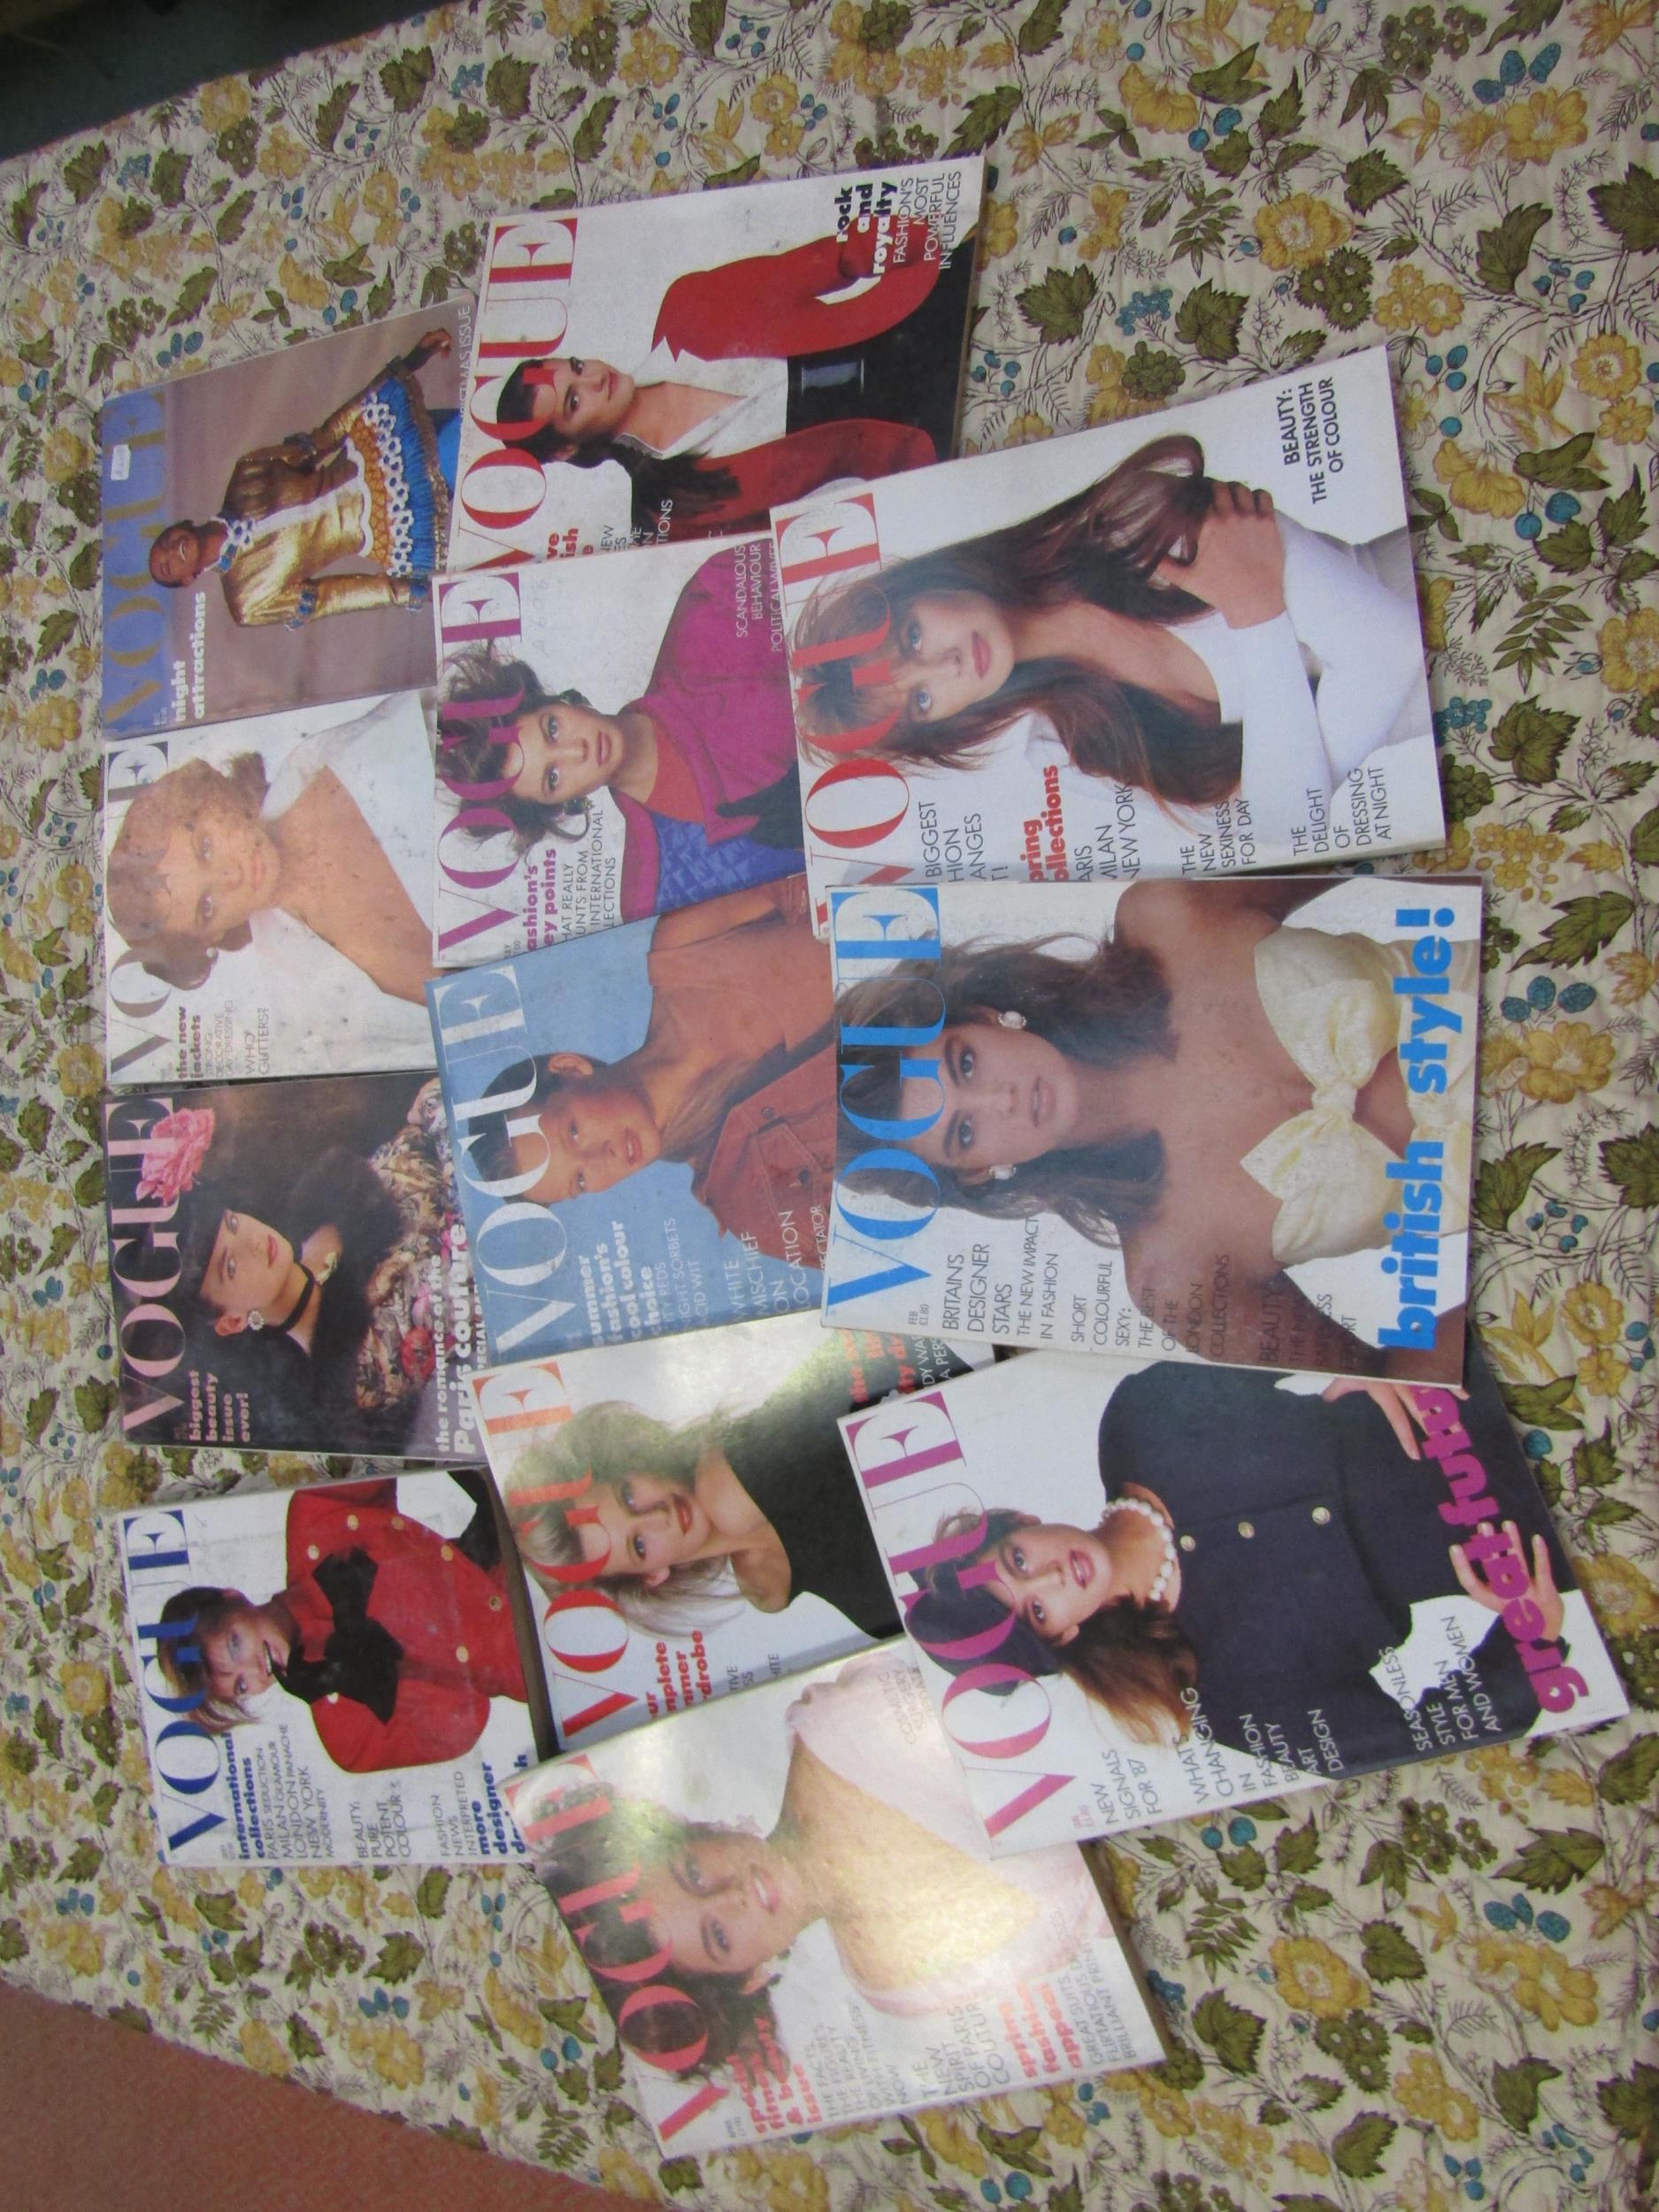 British Vogue magazine 1980 - January (1), February (2), March 1st (3), March 15th (4), April 1st ( - Image 10 of 40